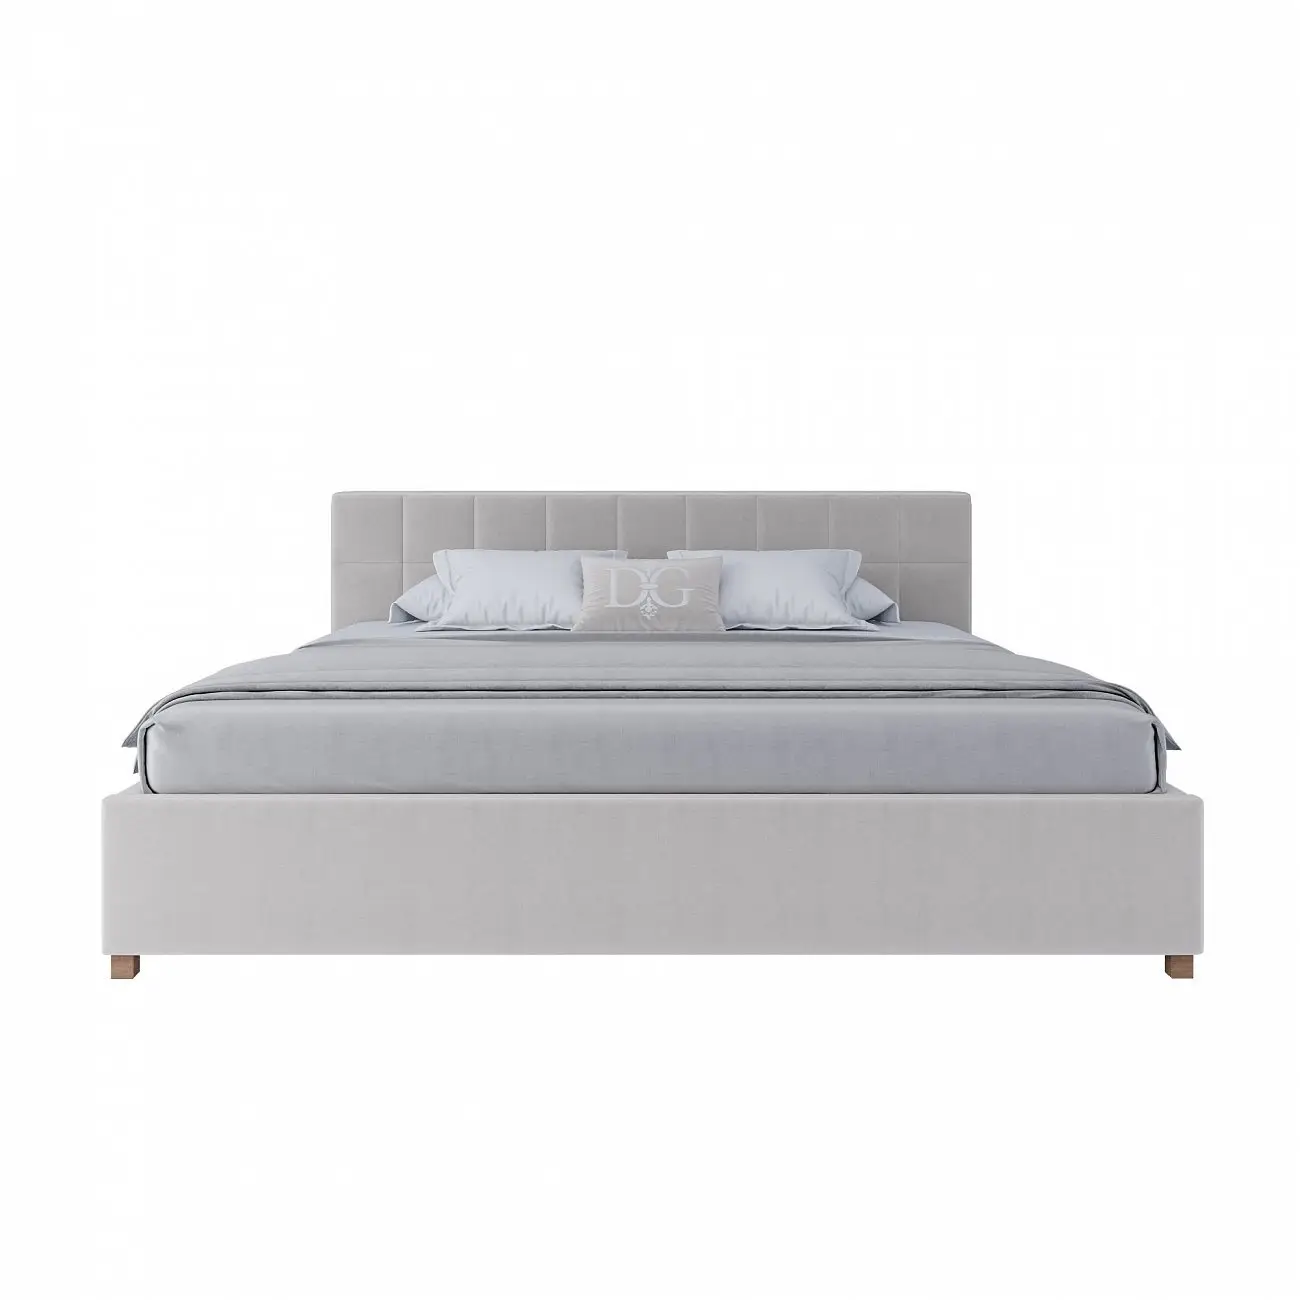 Euro bed with upholstered headboard 200x200 cm white Wales